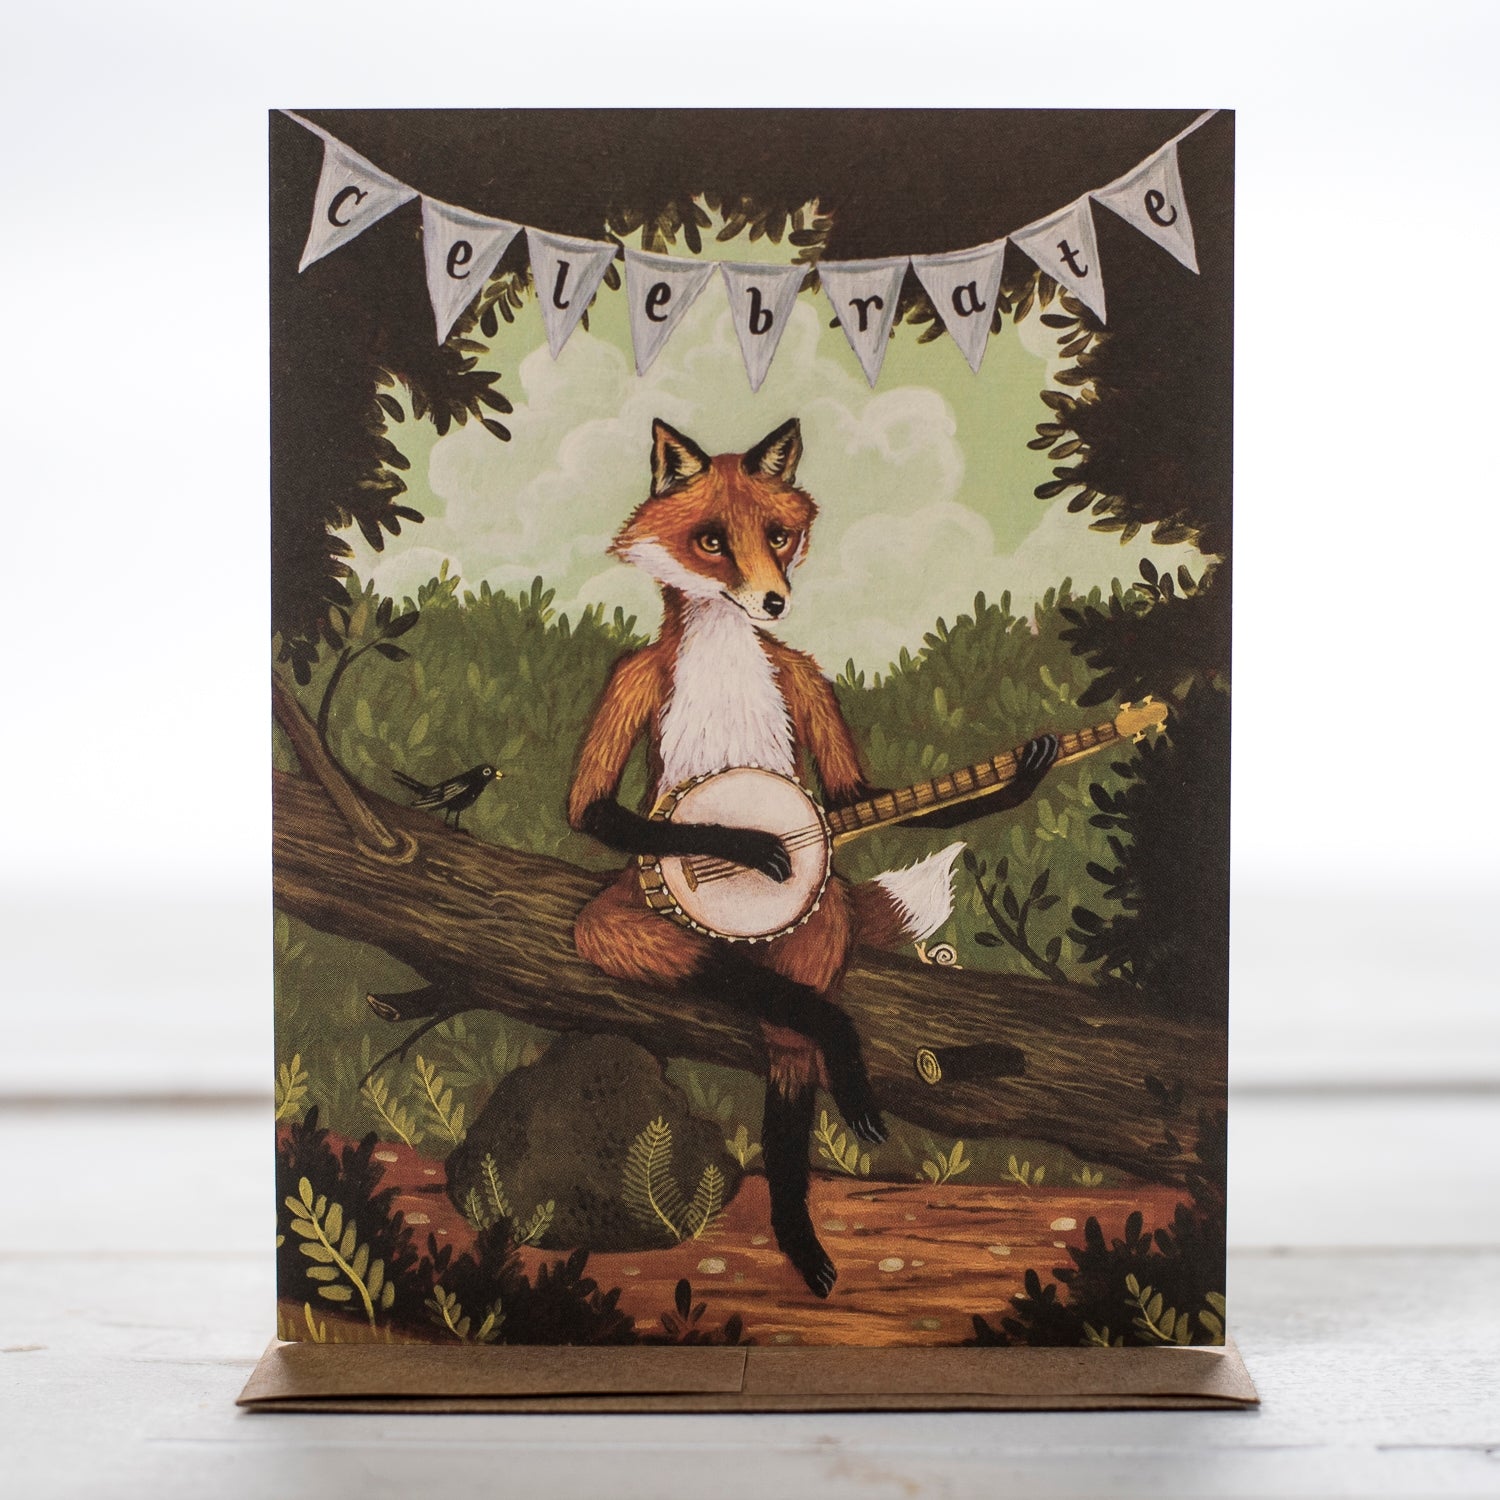 Showing the Fox Celebrate Greeting Gard with a clever Fox sitting on a fallen tree with a banner hanging above his head with the word celebrate spelled out.